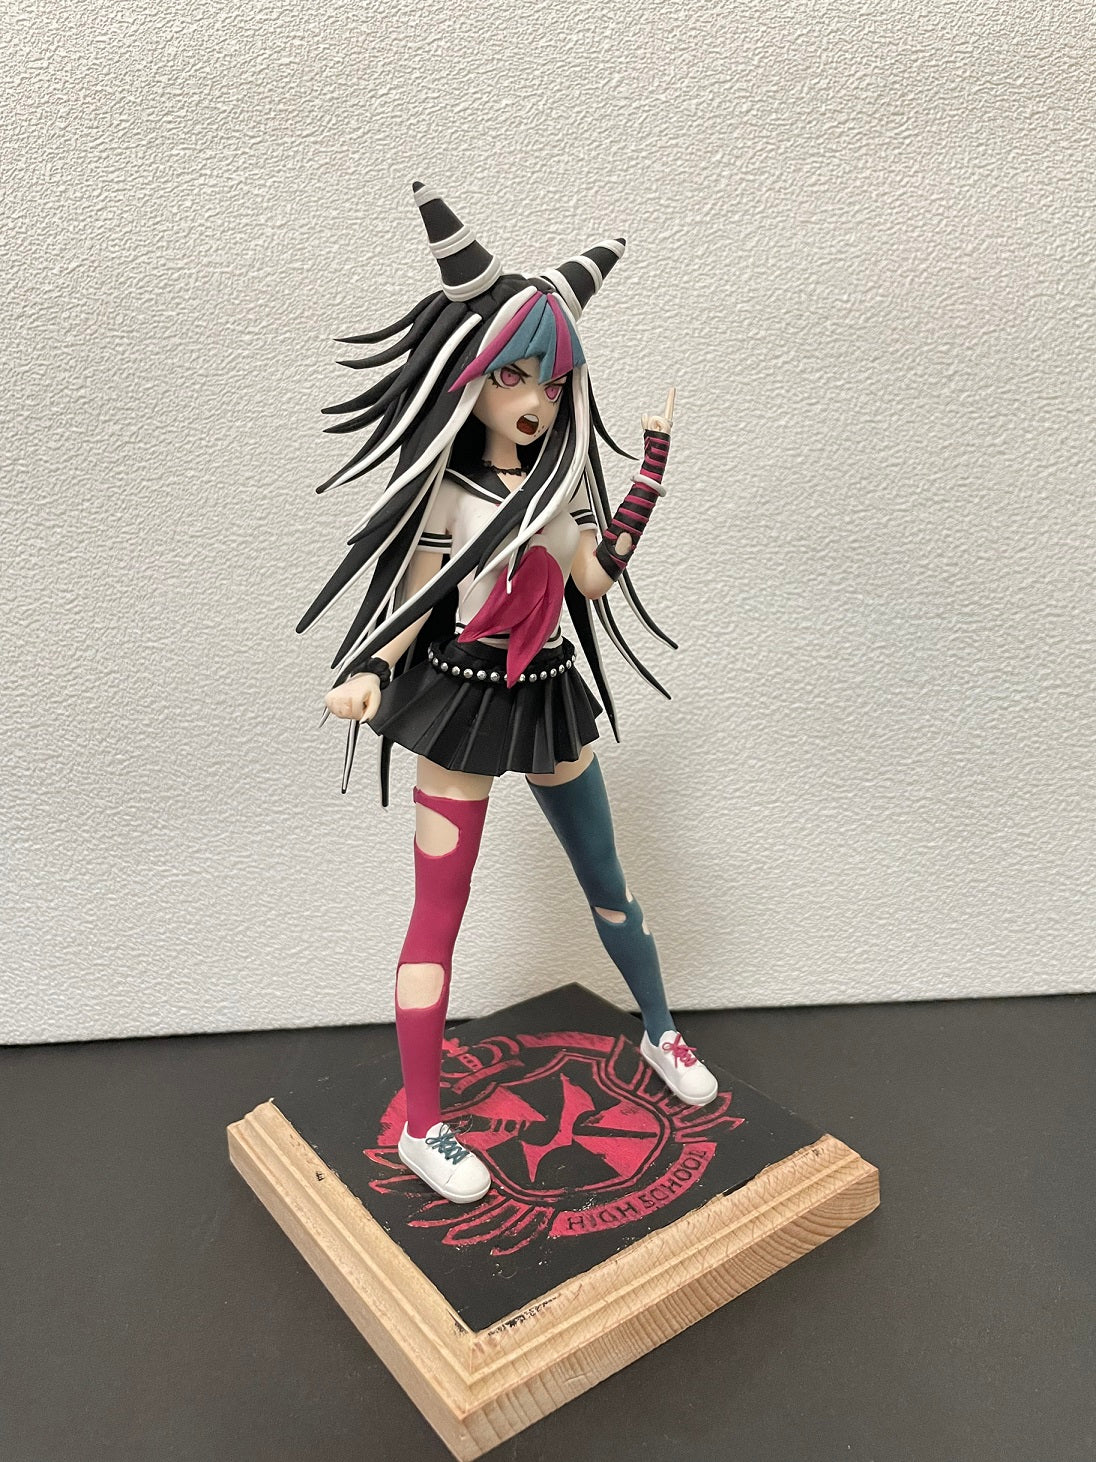 16 Scale Blank Anime Sculpture with Dust Base Sugar Shapers Mr casting  block reviews  Pyramidcats Garage kit and Anime Sculpture